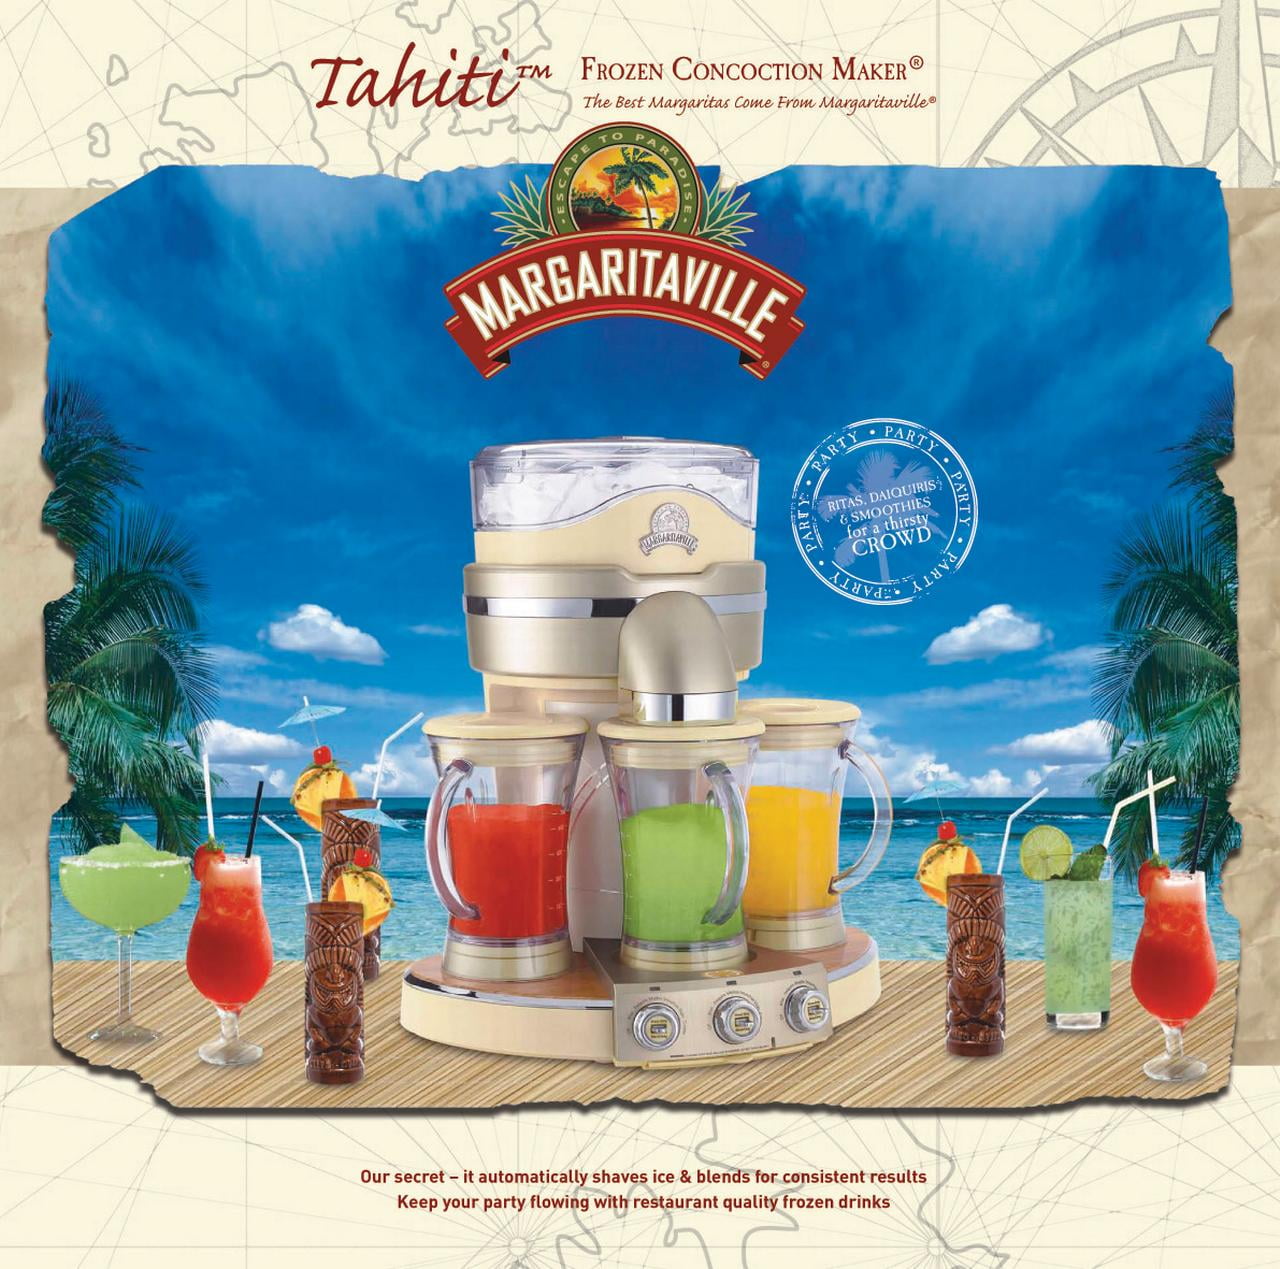 Bought a Margaritaville frozen drink machine on a whimwhat